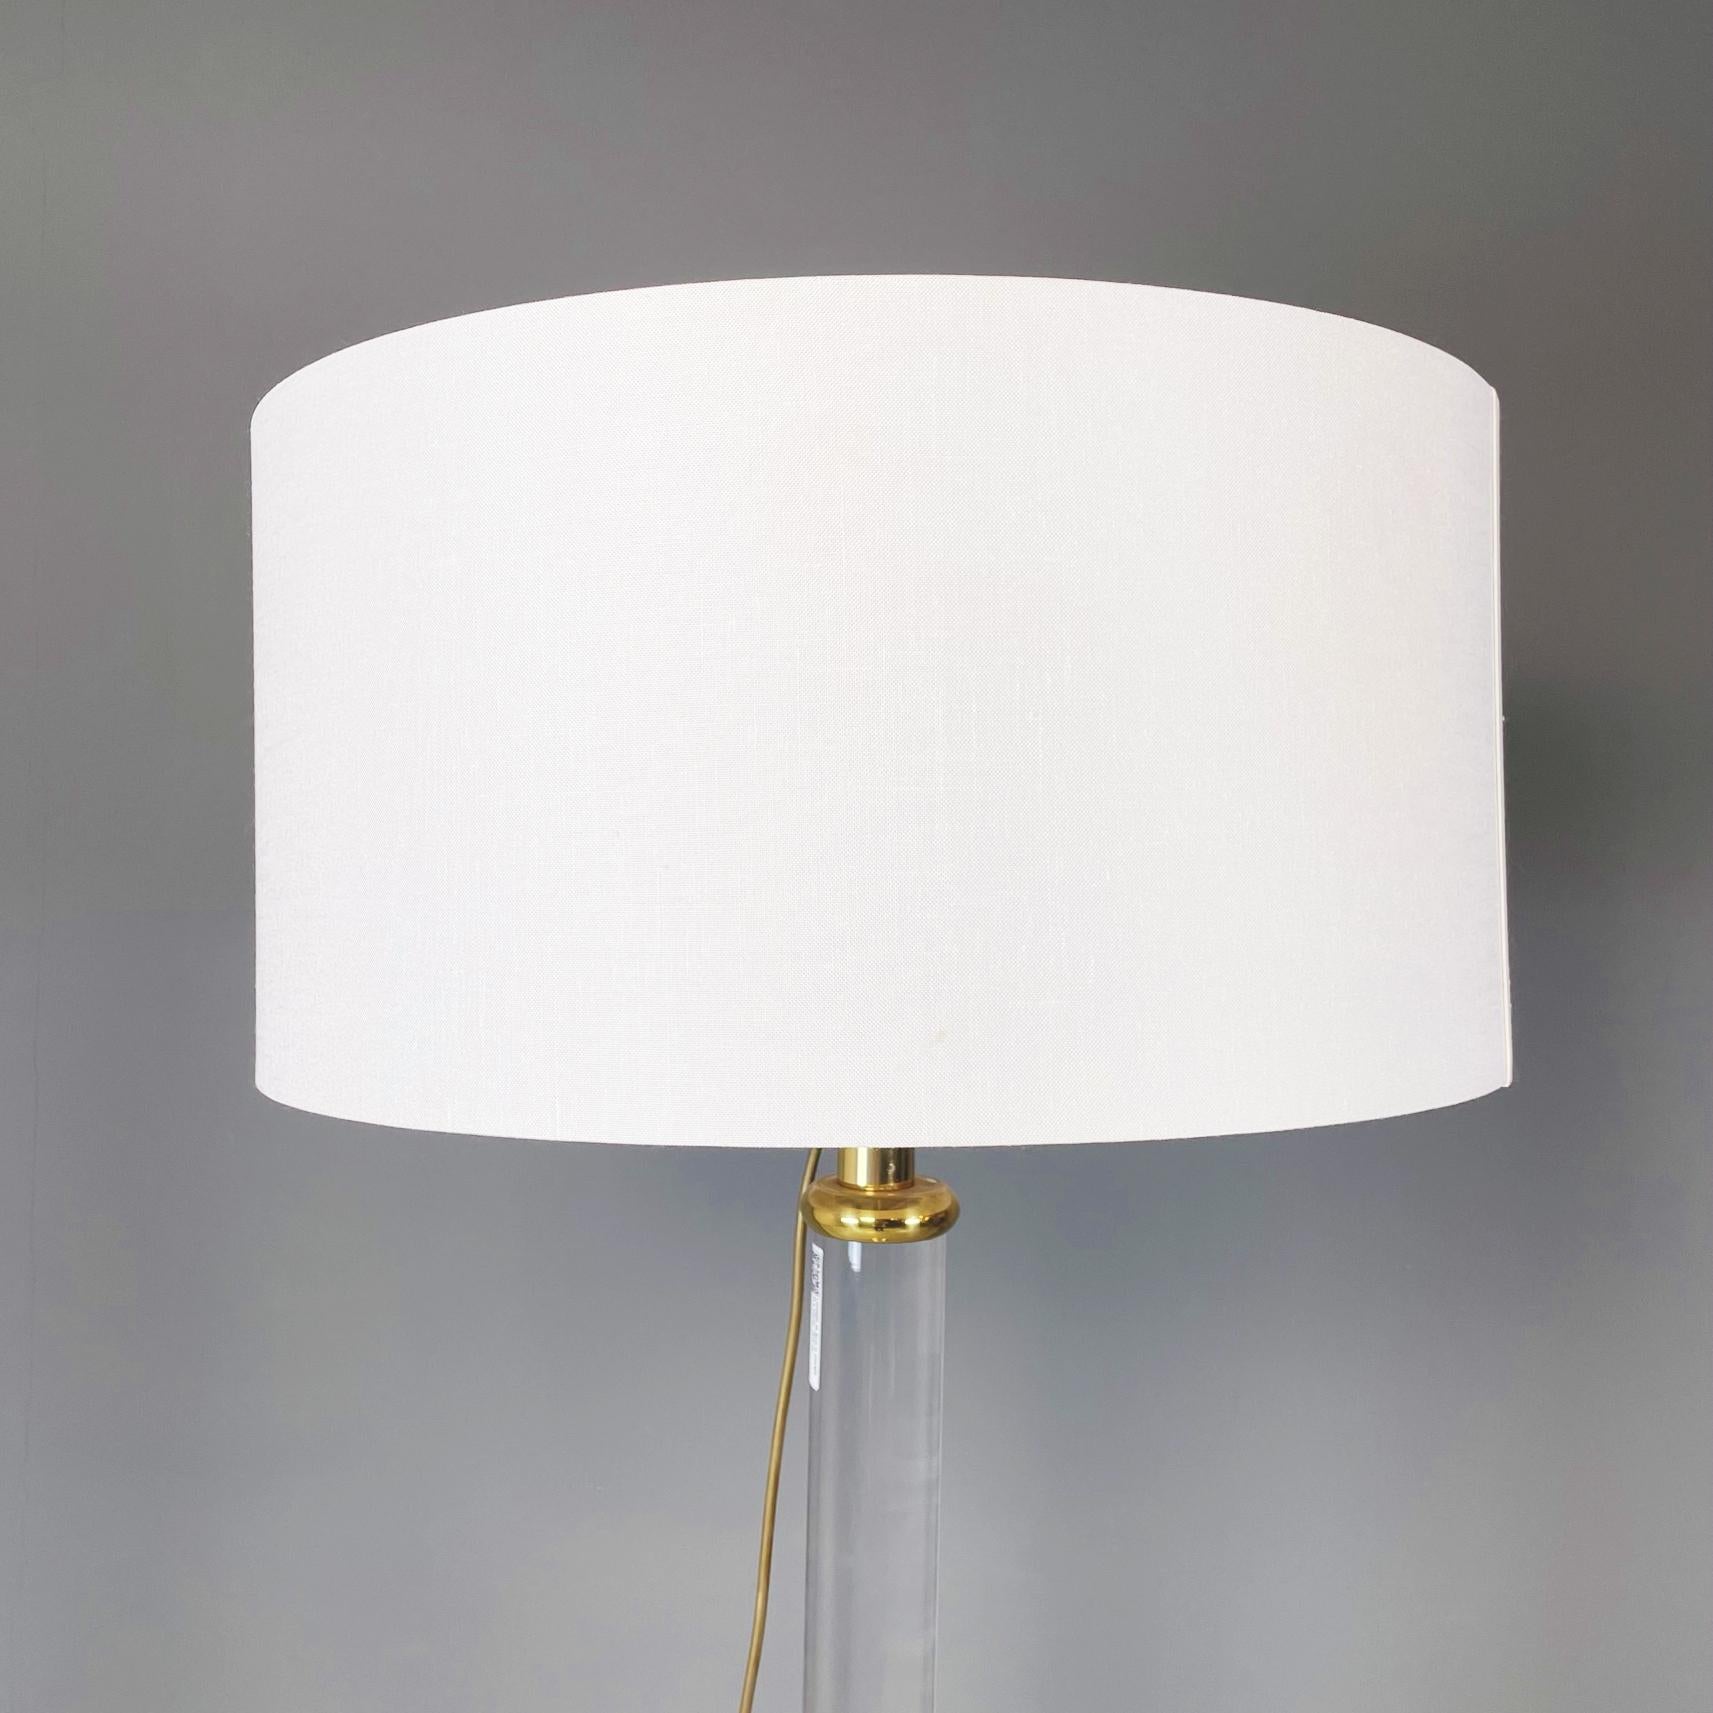 Italian Modern Floor Lamp in White Fabric Lampshade, Plexiglass and Brass, 1980s In Good Condition For Sale In MIlano, IT